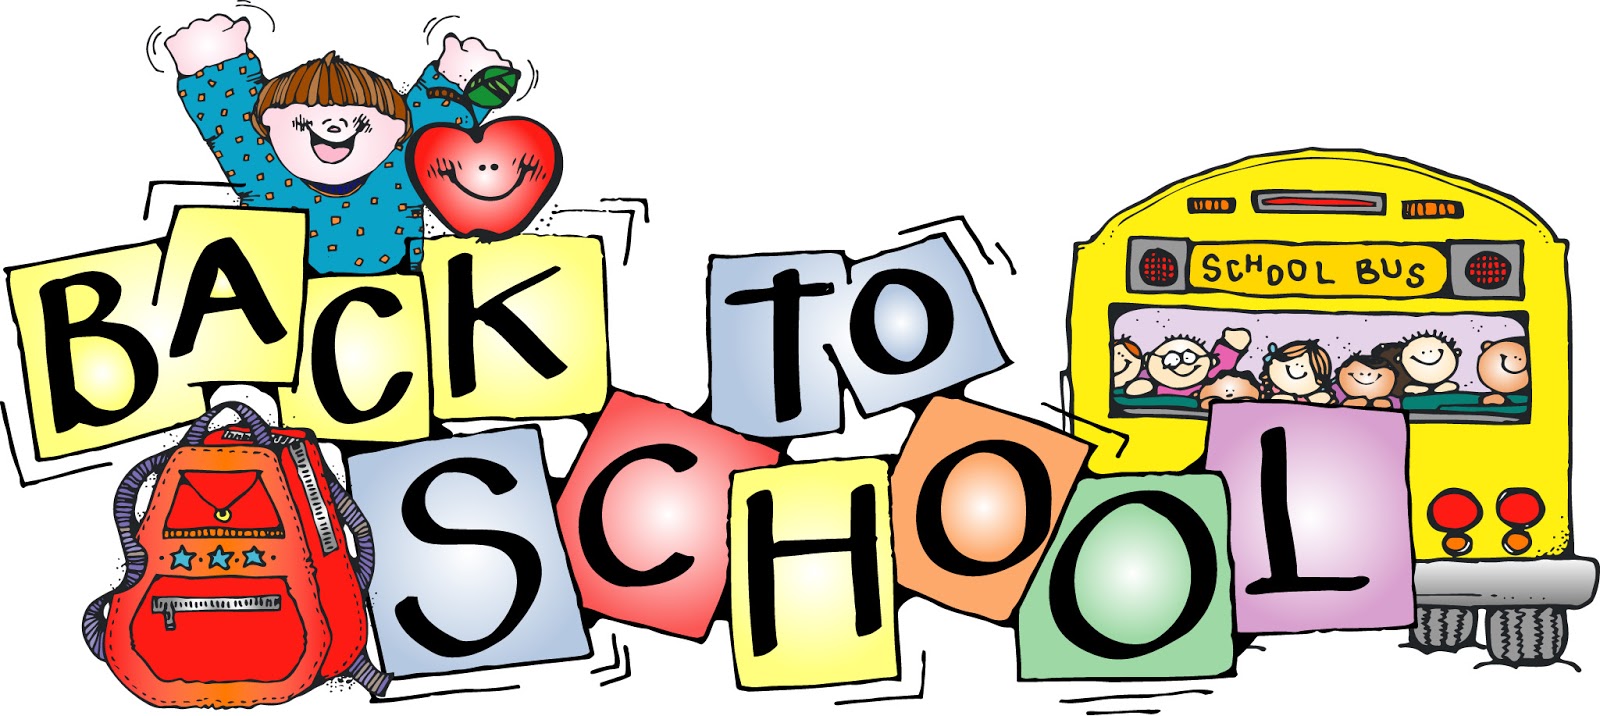 back to school images clip art free - photo #19